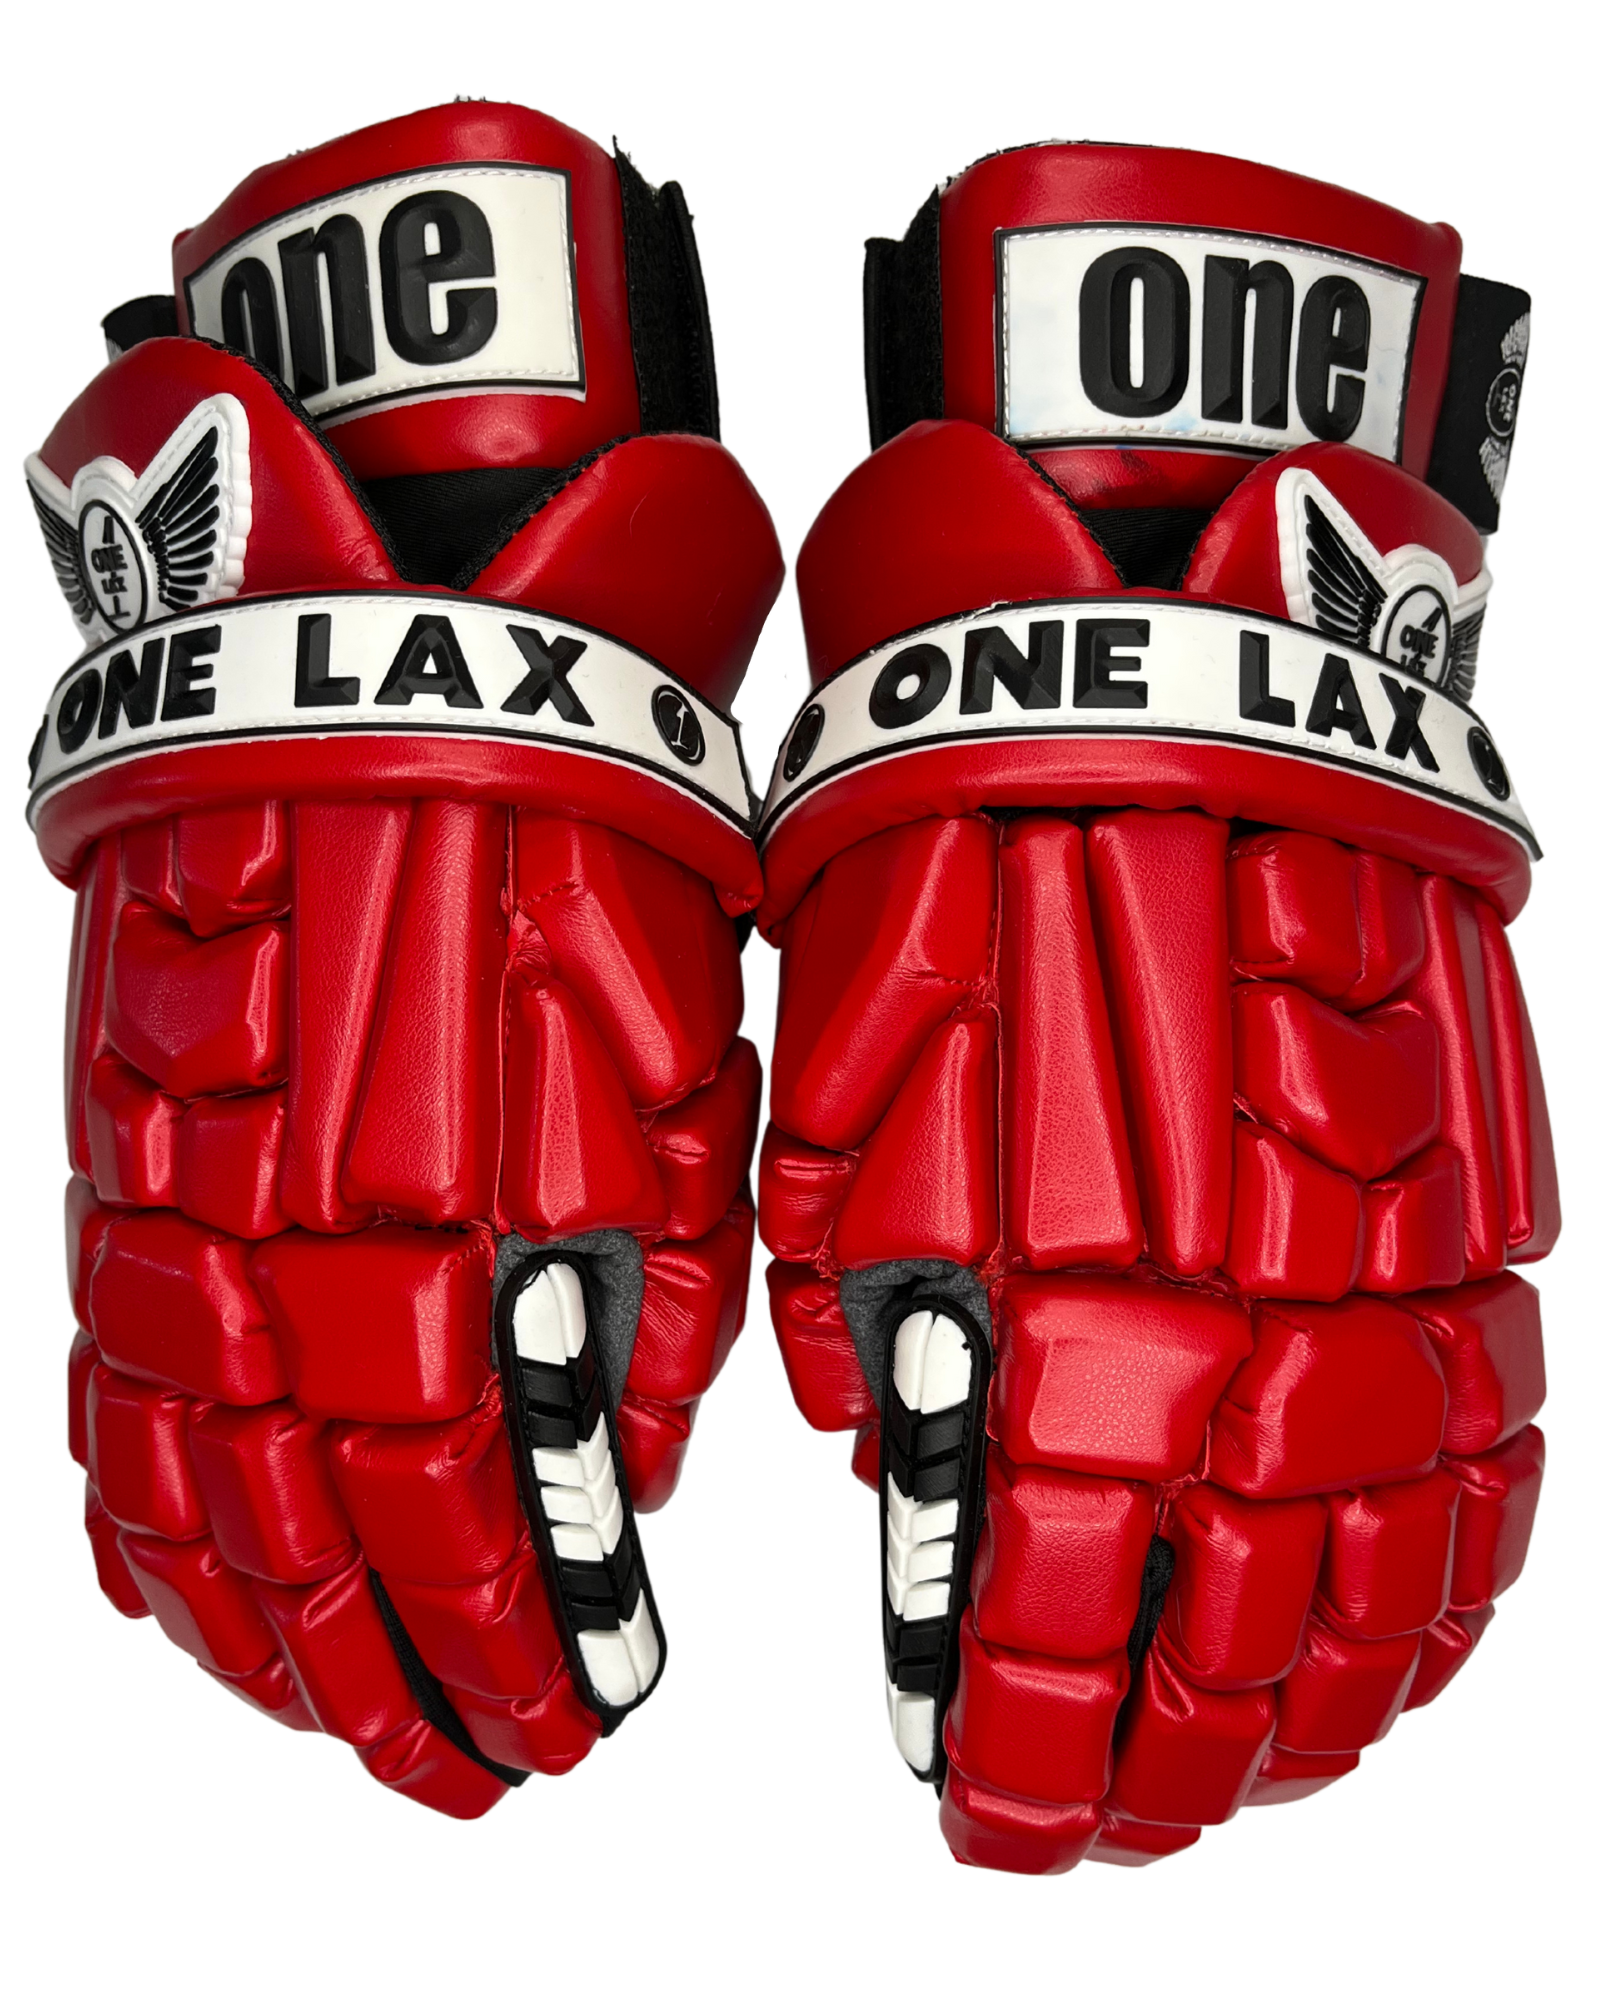 JR. 1 Gloves in Red | 2 Kids Sizes Available | HYBRID Box & Field Lacrosse Gloves - One Lax